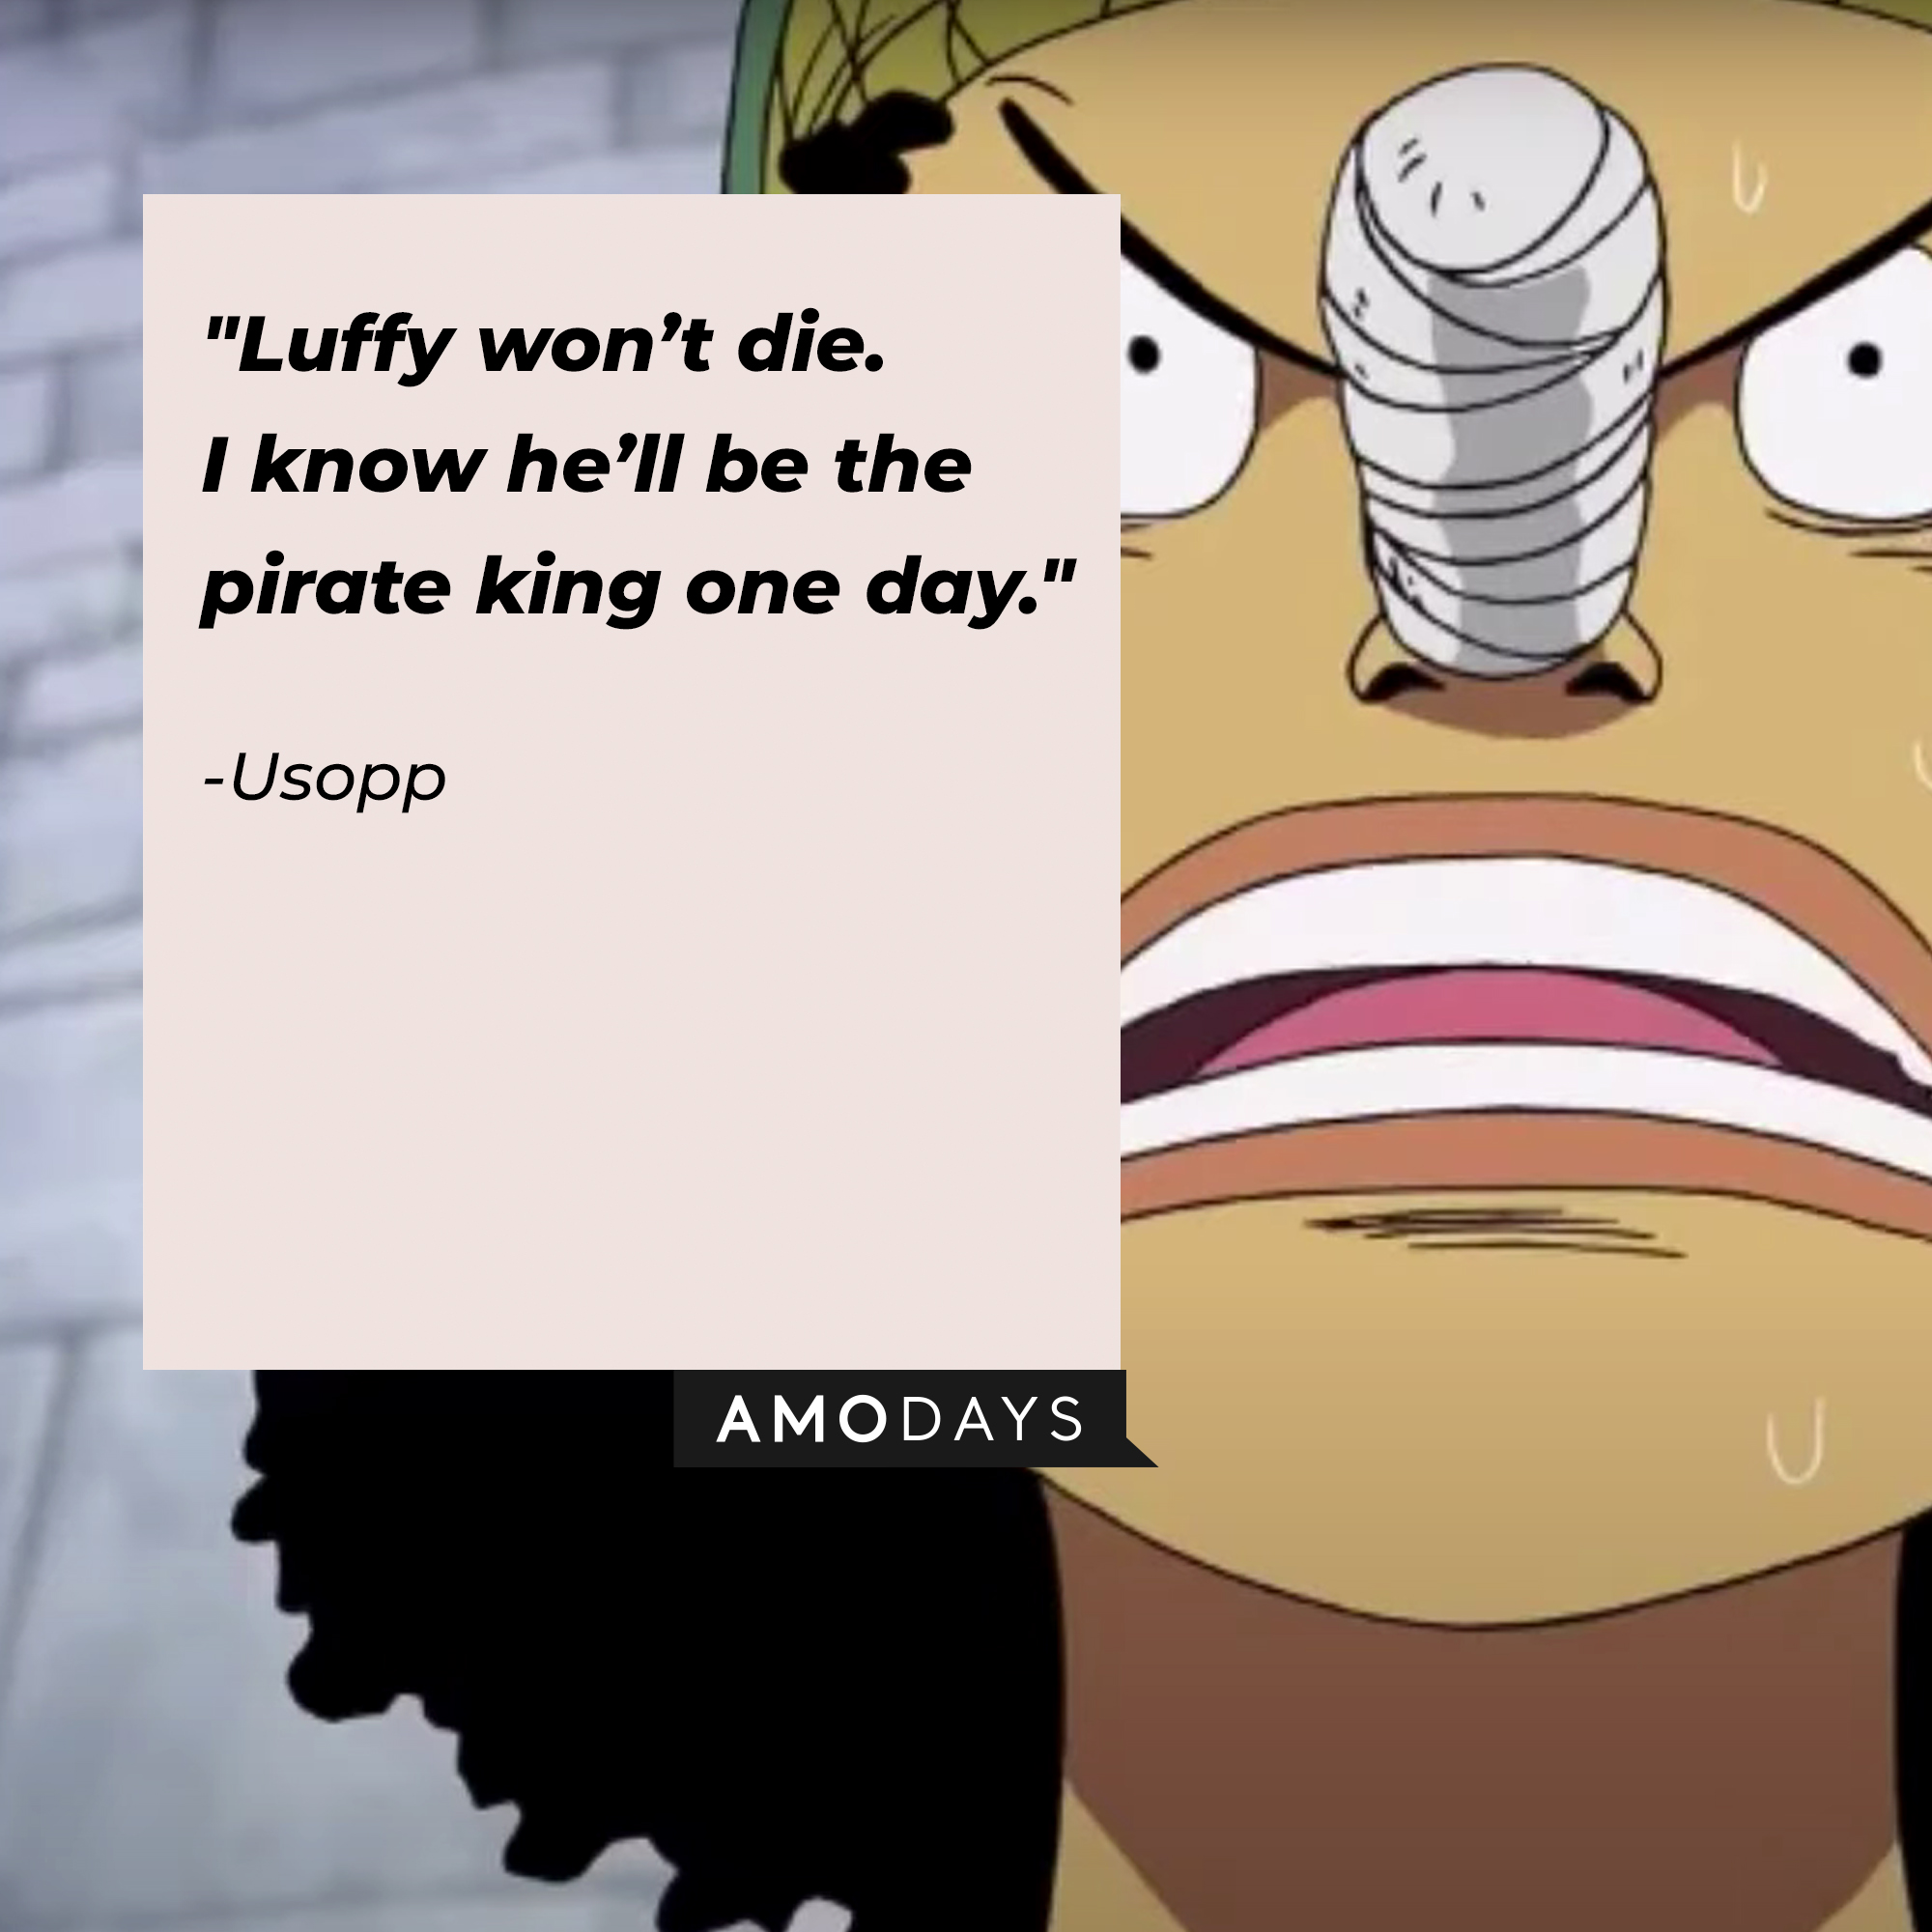 Usopp, with his quote:  “Luffy won’t die. I know he’ll be the pirate king one day.” |  Source: facebook.com/onepieceofficial